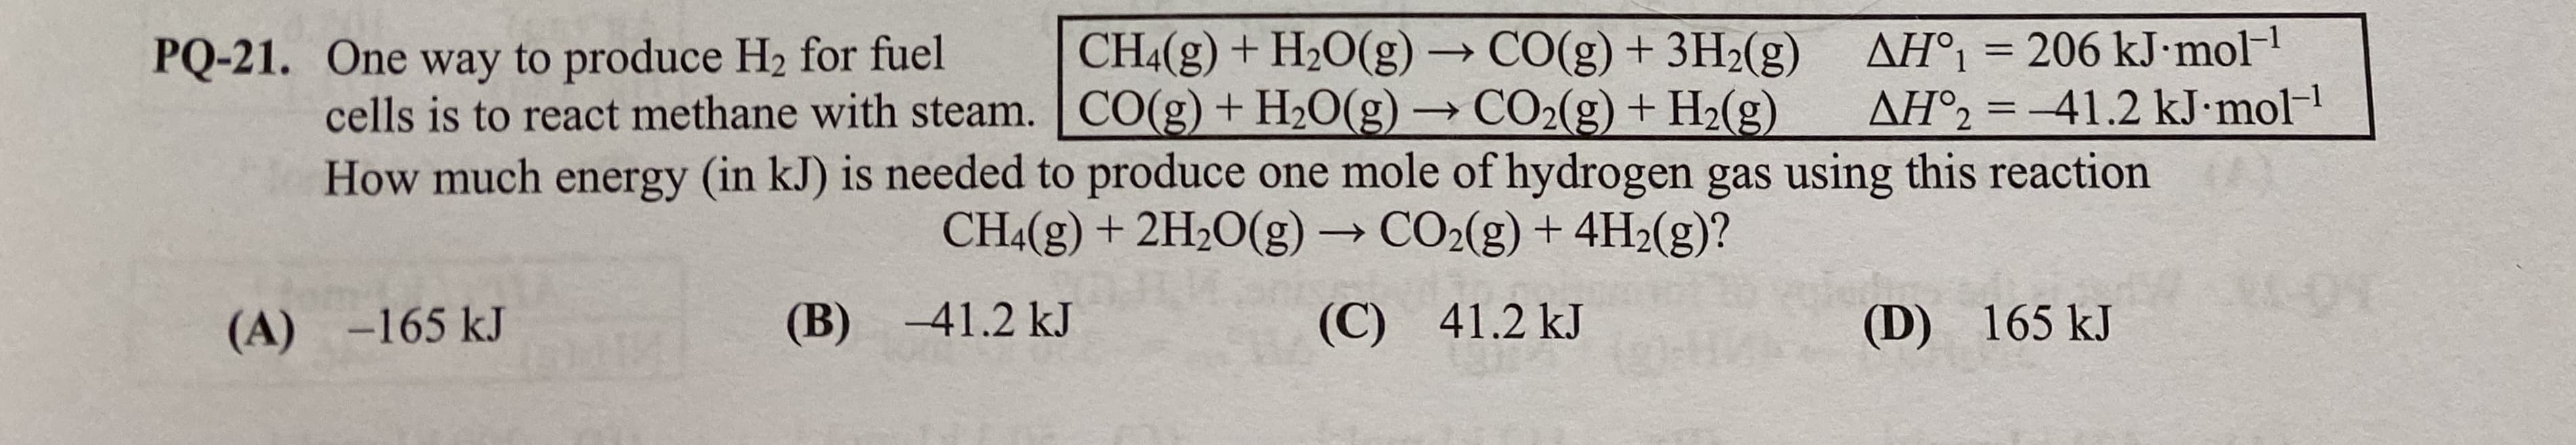 AH°1 = 206 kJ•mol-1
AH°2 = –41.2 kJ•mol-1
CH4(g) + H2O(g)→CO(g) + 3H2(g)
CO(g)+ H2O(g) → CO2(g) + H2(g)
PQ-21. One way to produce H2 for fuel
cells is to react methane with steam.
->
%3D
How much energy (in kJ) is needed to produce one mole of hydrogen gas using this reaction
CHA(g) + 2H2O(g)→CO2(g) + 4H2(g)?
(C) 41.2 kJ
(B) -41.2 kJ
(D) 165 kJ
(A) -165 kJ
